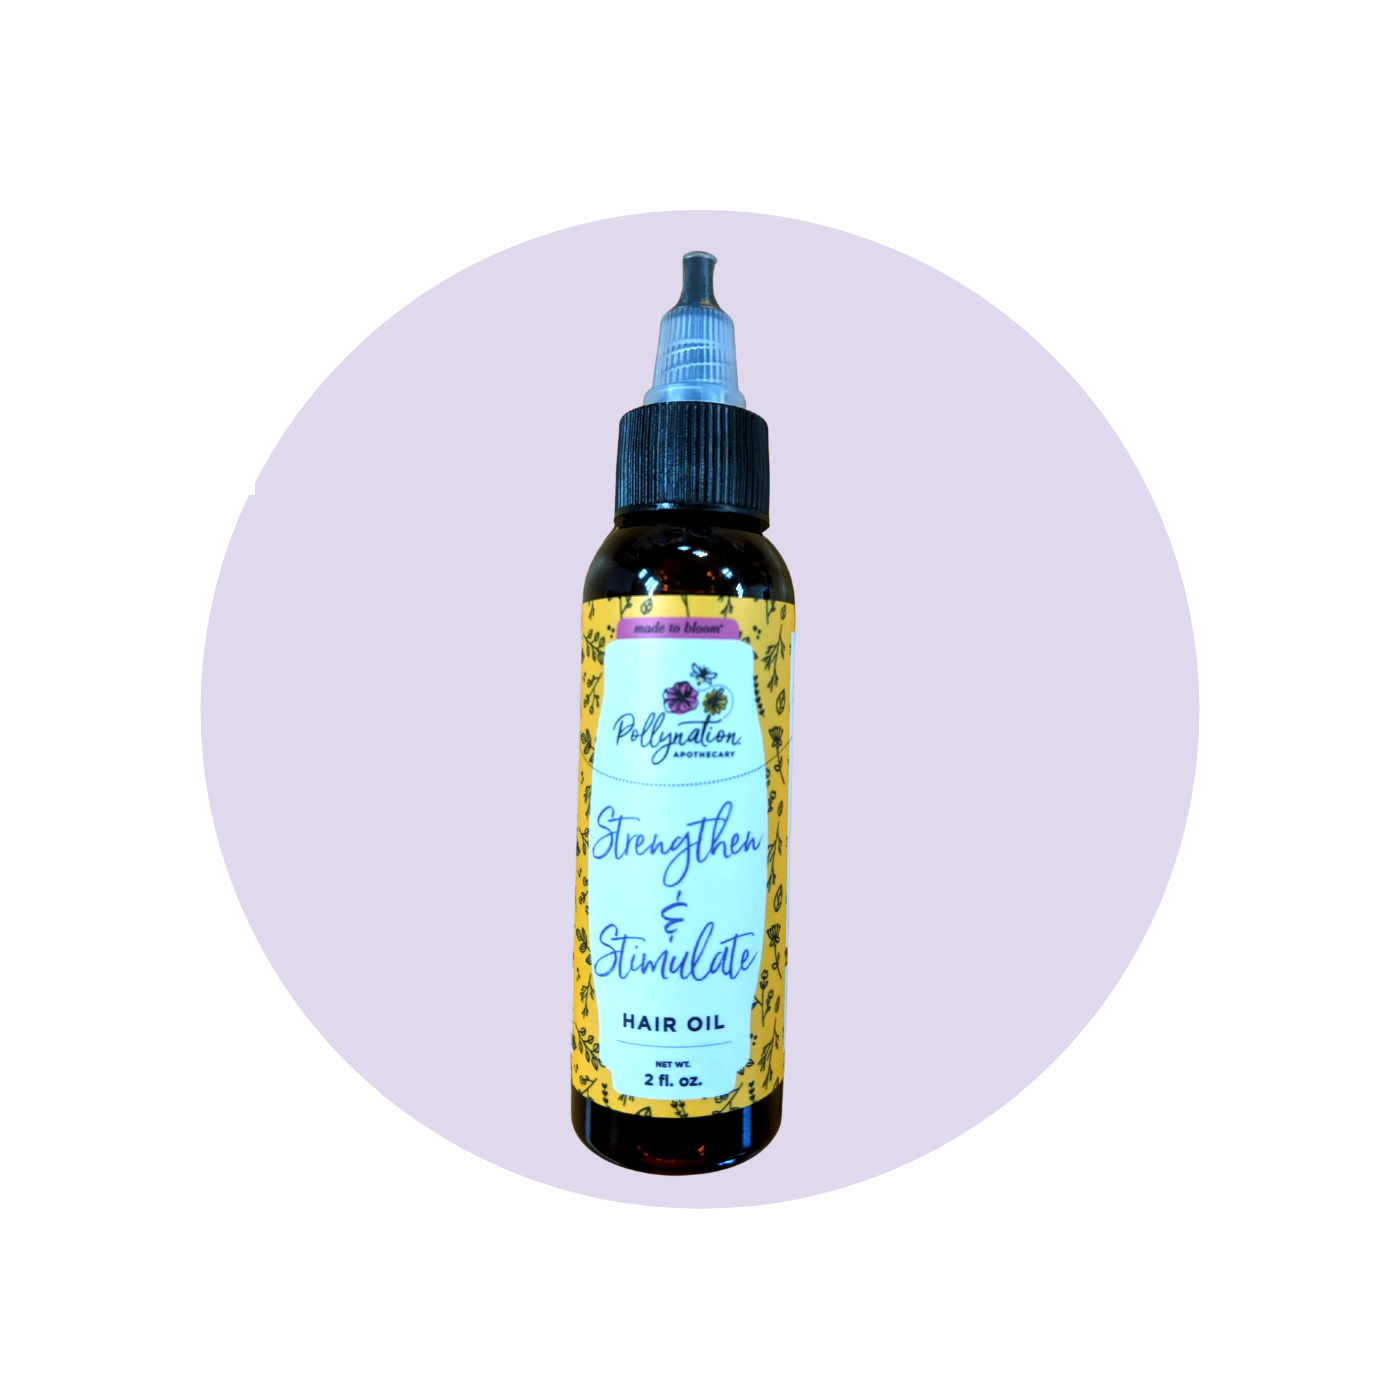 Strengthen & Stimulate Hair Oil – Pollynation Apothecary